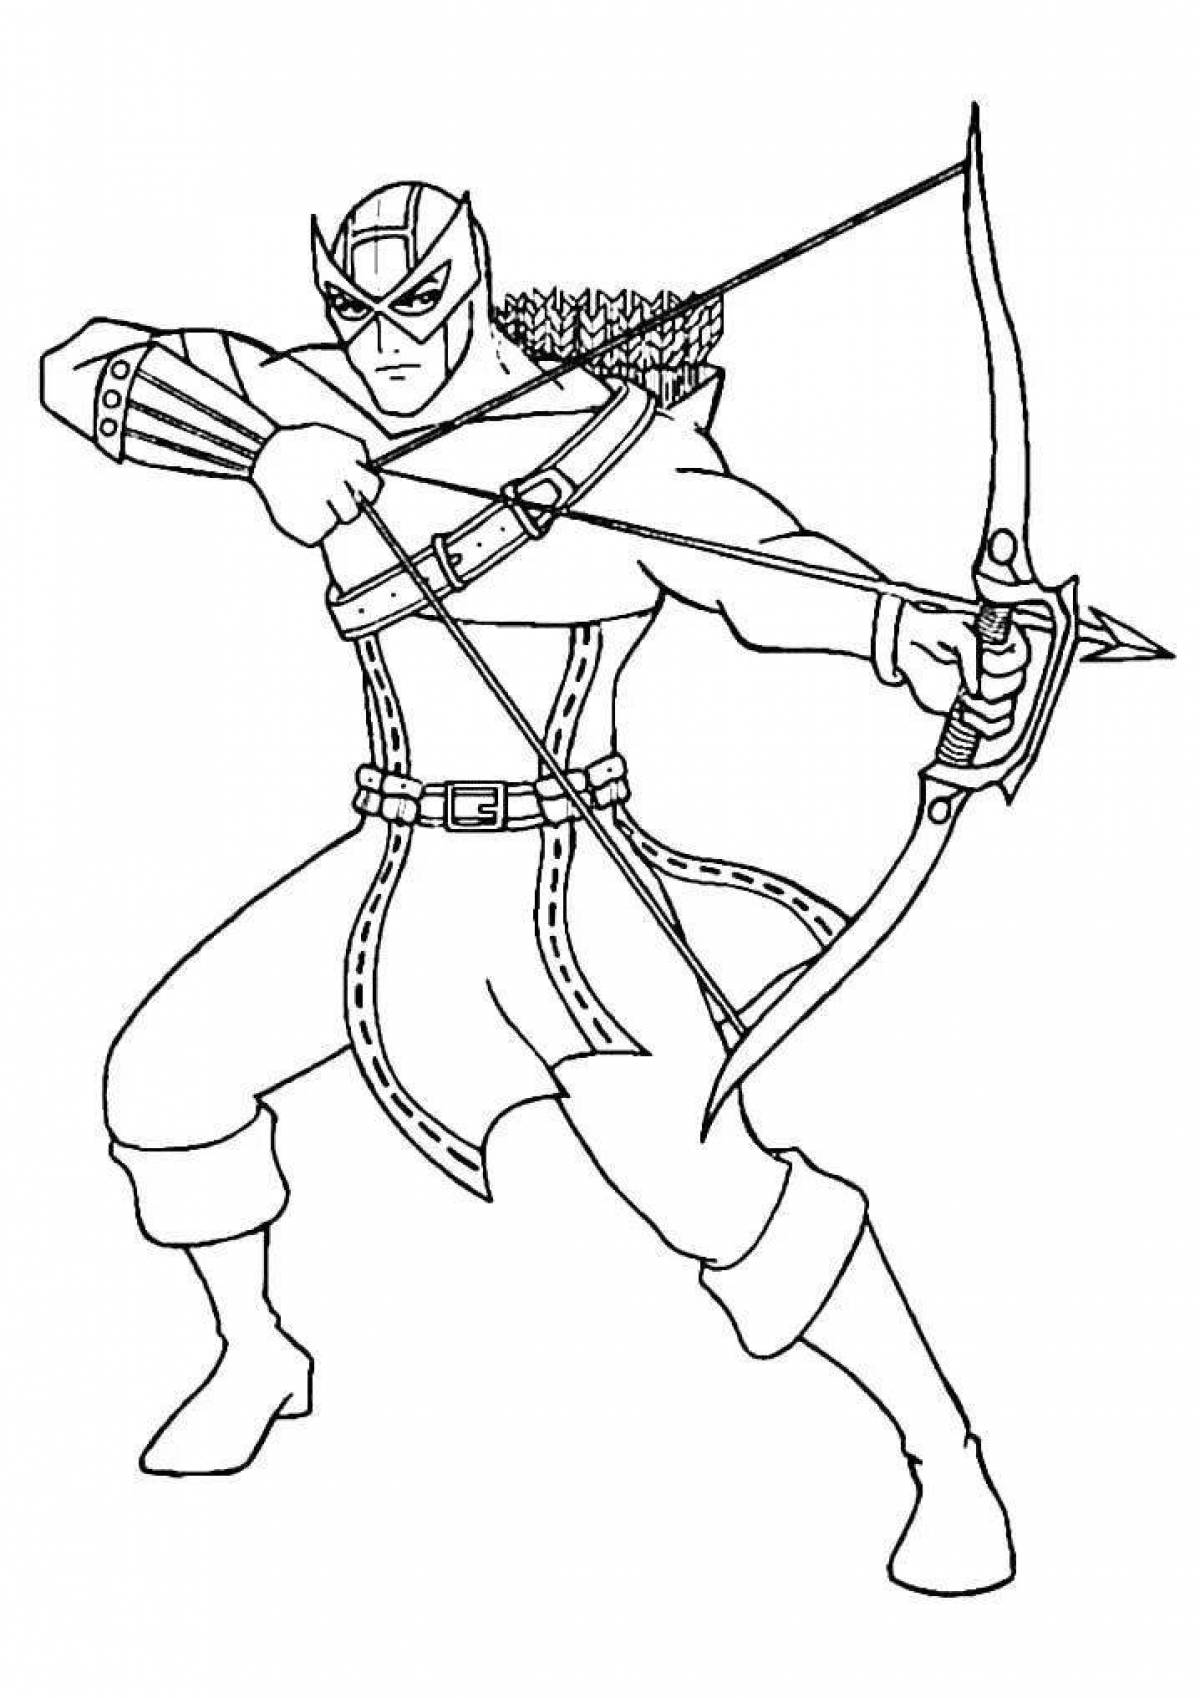 Colorful Hawkeye Coloring Page